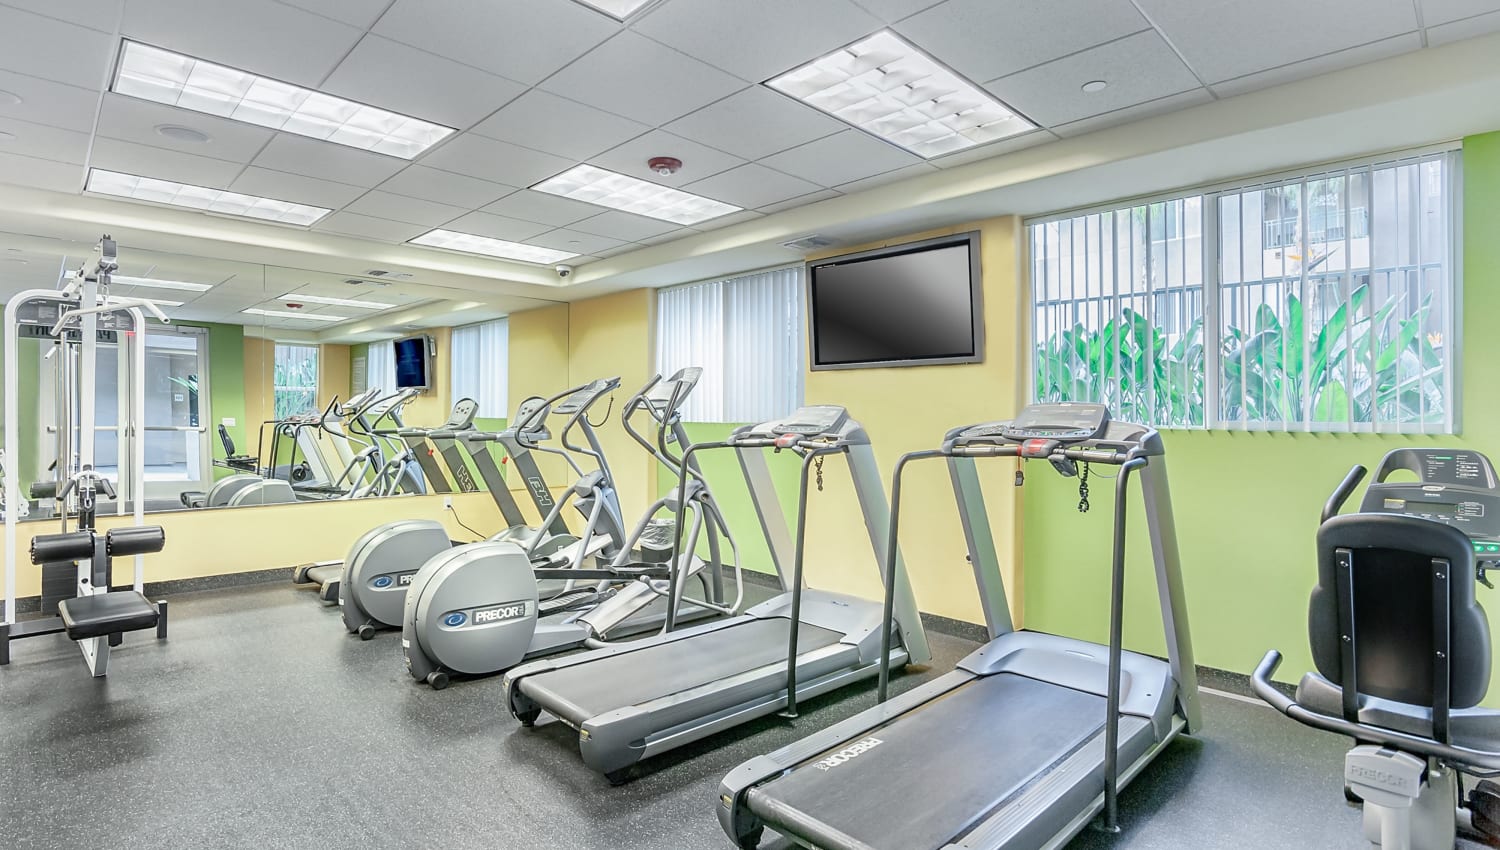 Fitness center at The Pointe Apartments in Brea, California